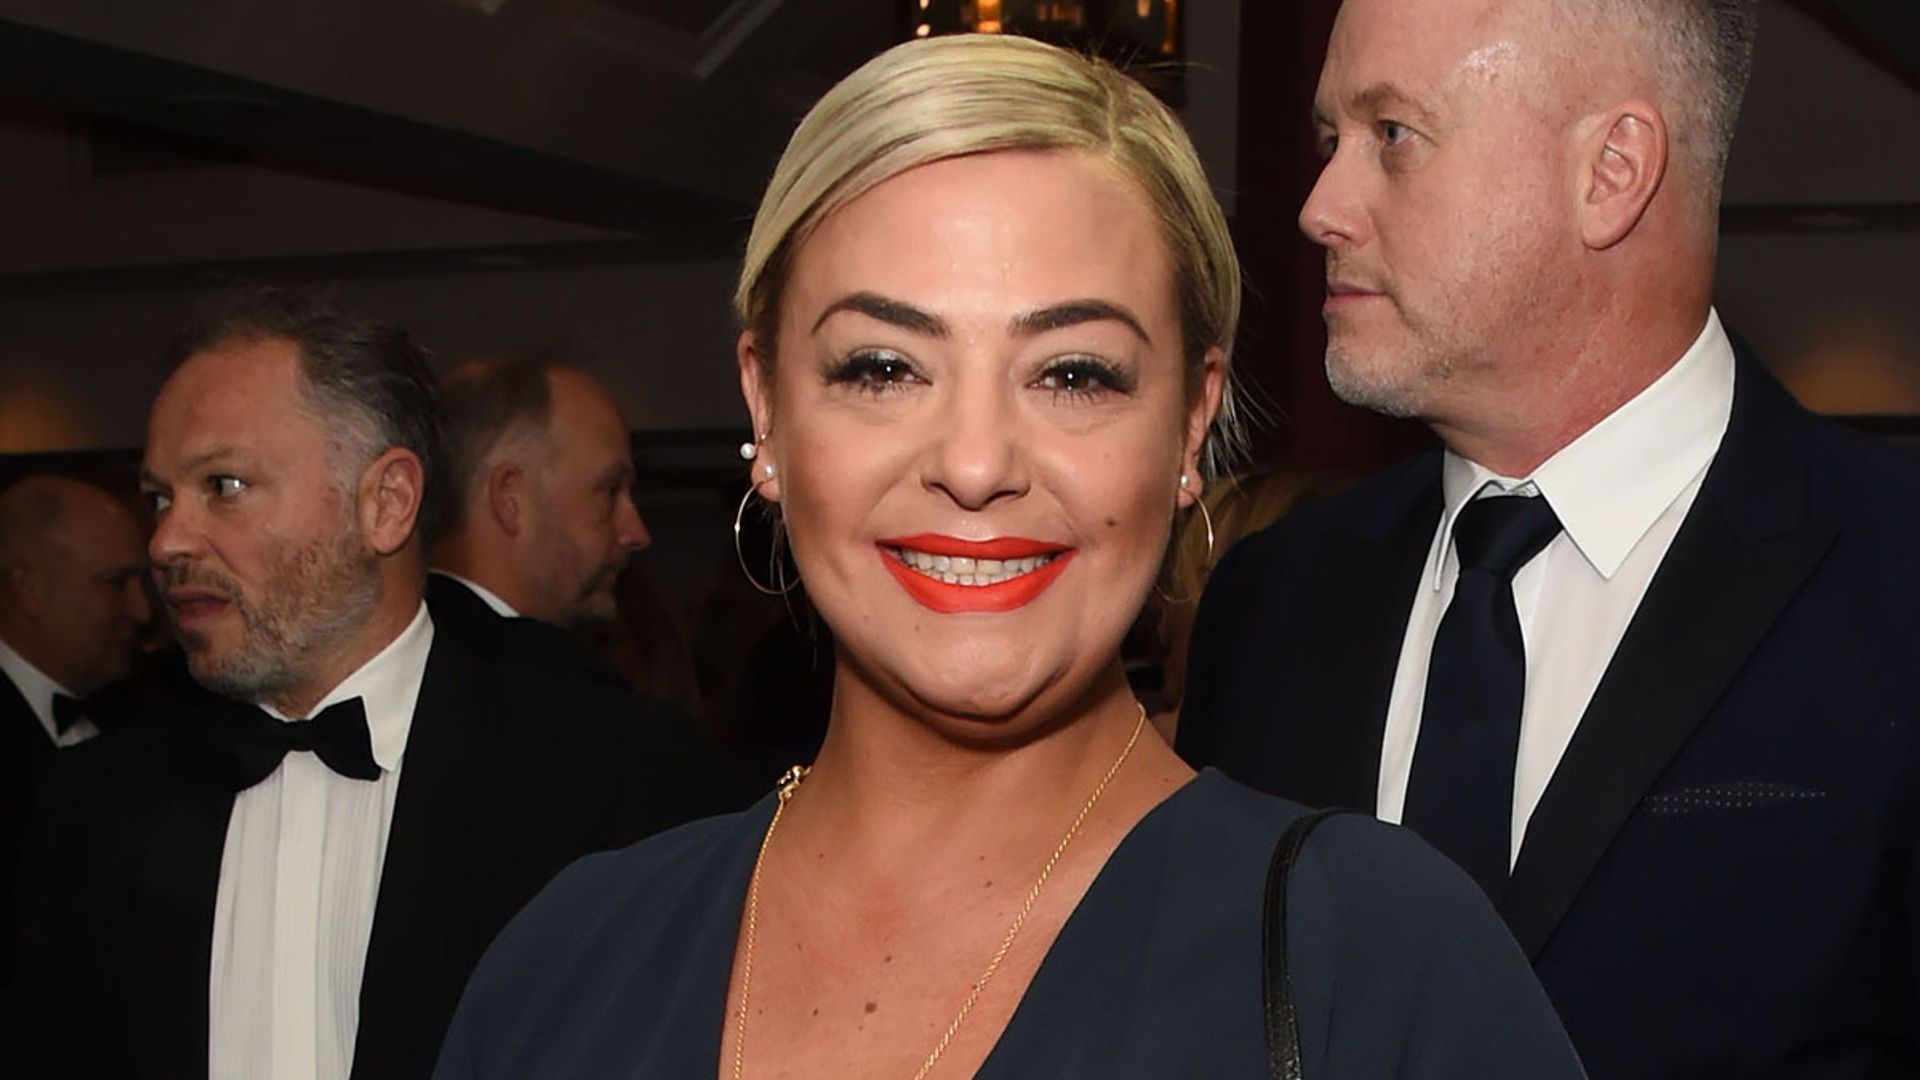 Strictly's Lisa Armstrong's unique home office features tribute to boyfriend James